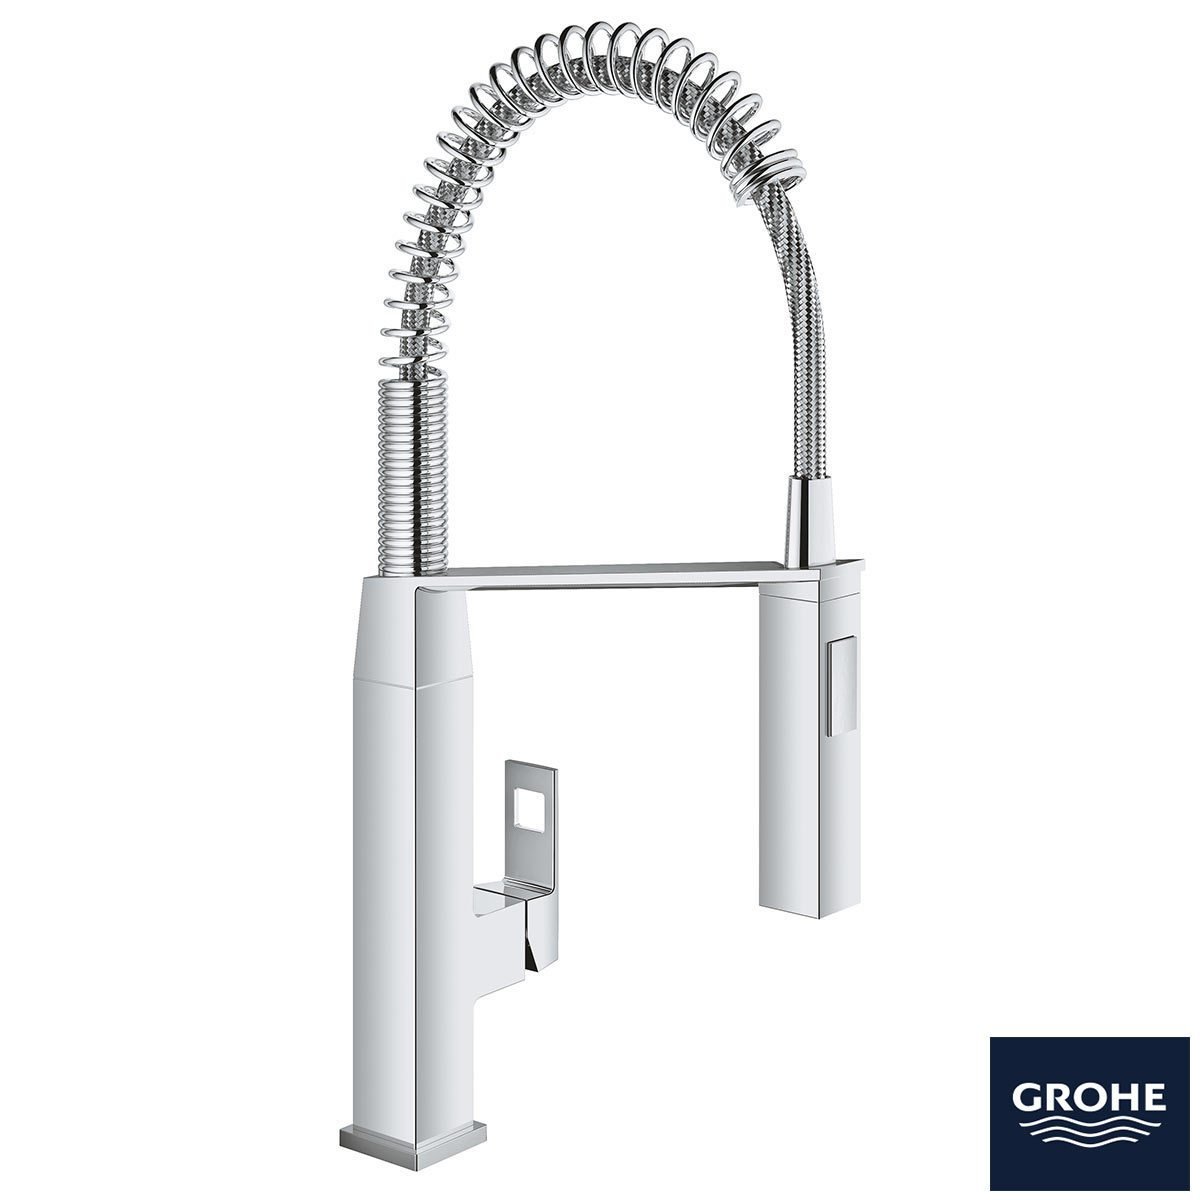 GROHE Eurocube Single-Lever Spring Mixer Tap in Chrome - Model 31395000 - Signature Retail Stores